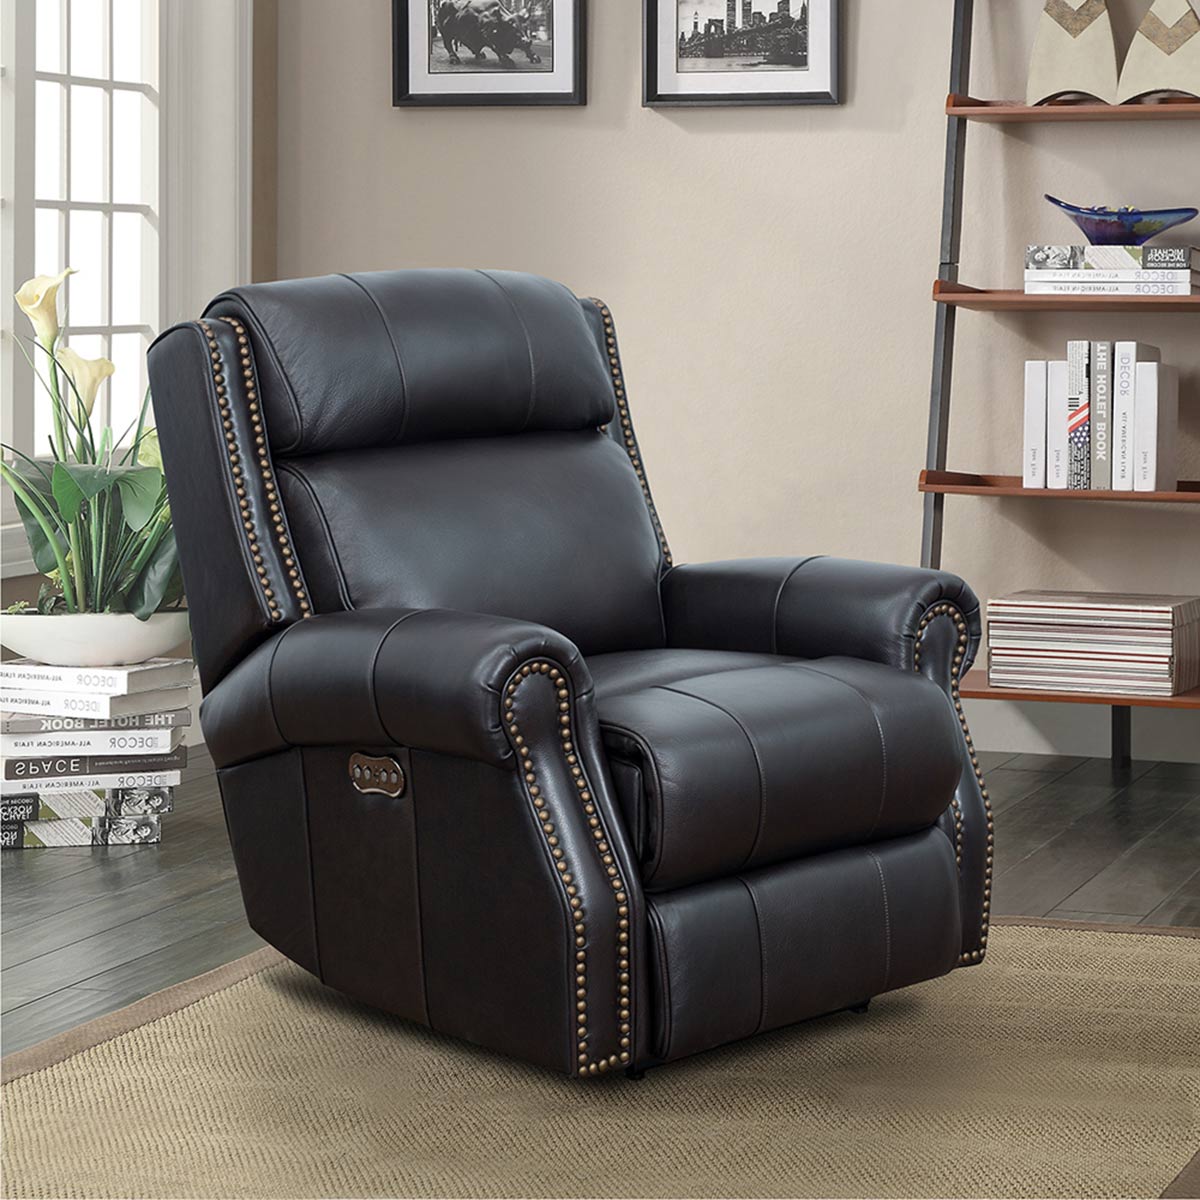 Barcalounger Blair Big and Tall Power Recliner Chair with Power Head Rest - Shoreham Fudge/all leather